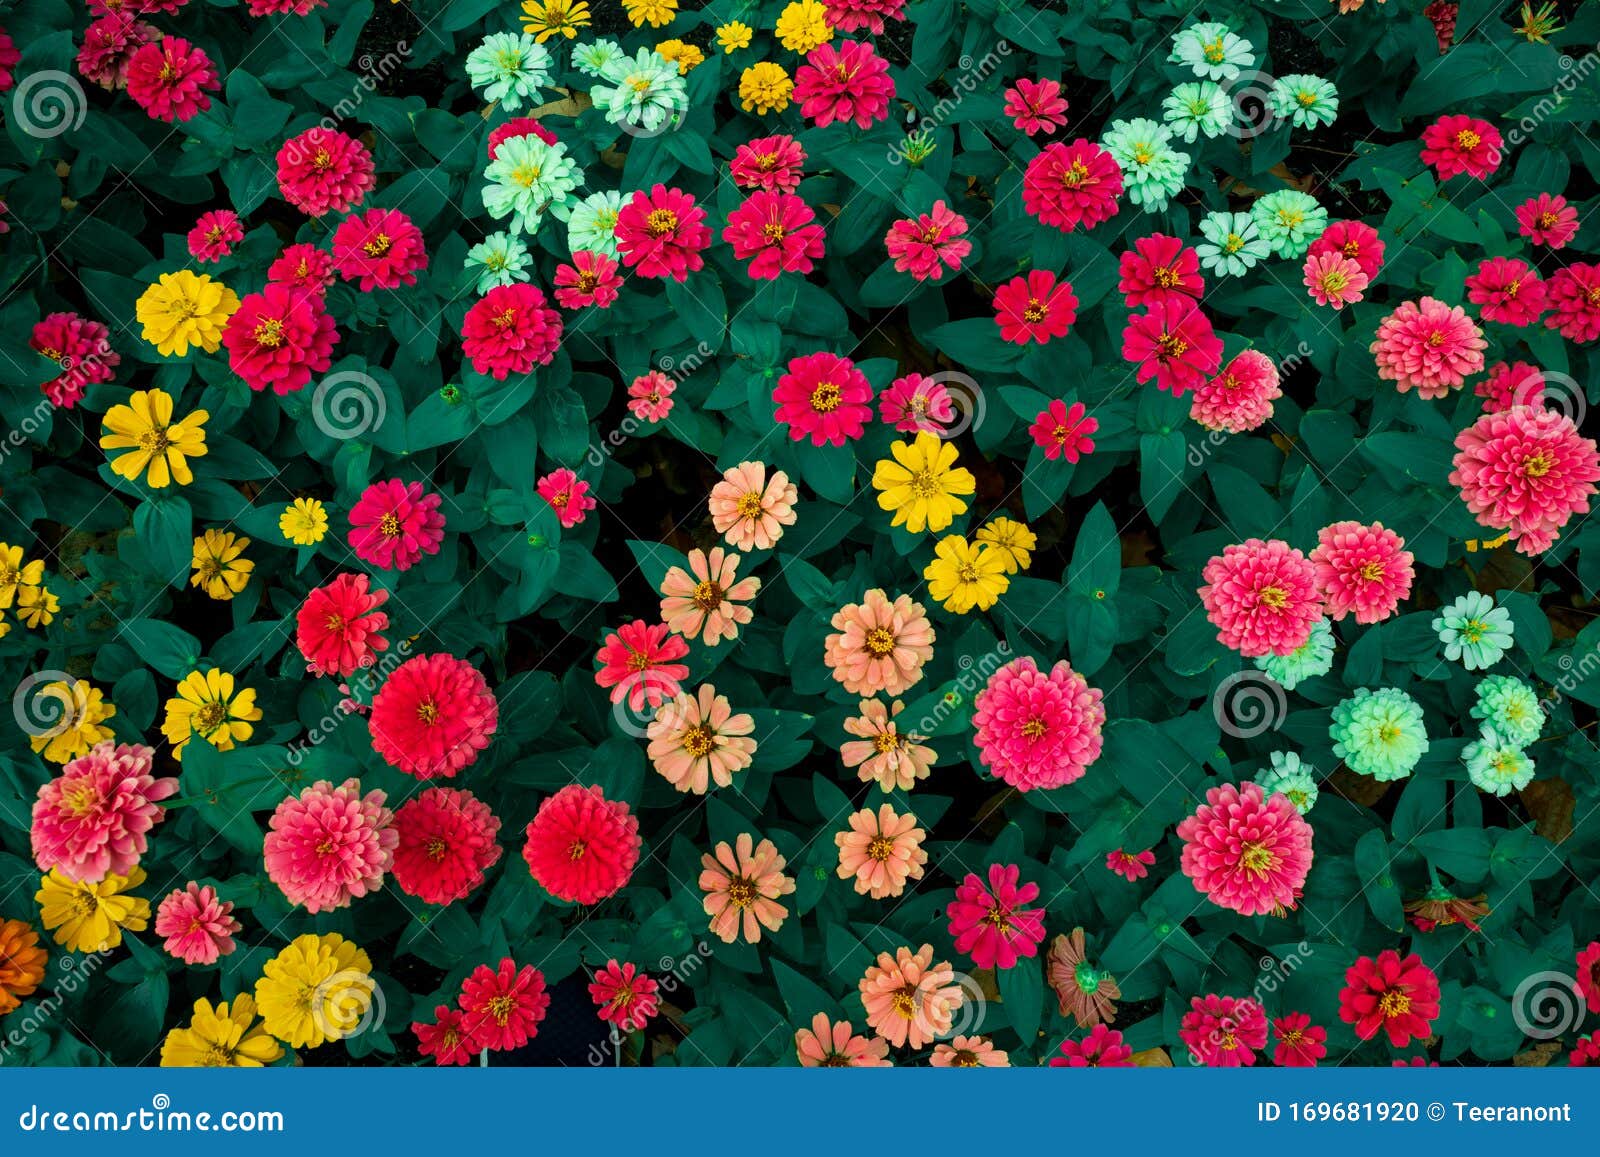 Colourful Flowers with Red, Yellow, Orange with Green Leaf Background Use  To Design Wallpaper or Nature Background Stock Photo - Image of color,  present: 169681920